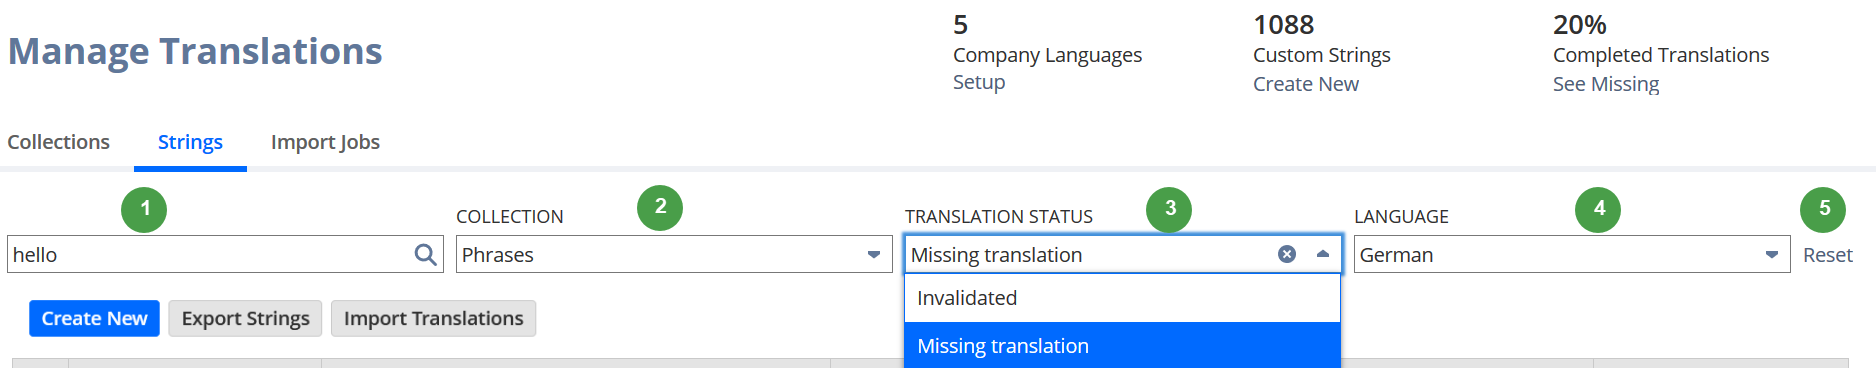 Manage Translations Strings filters.